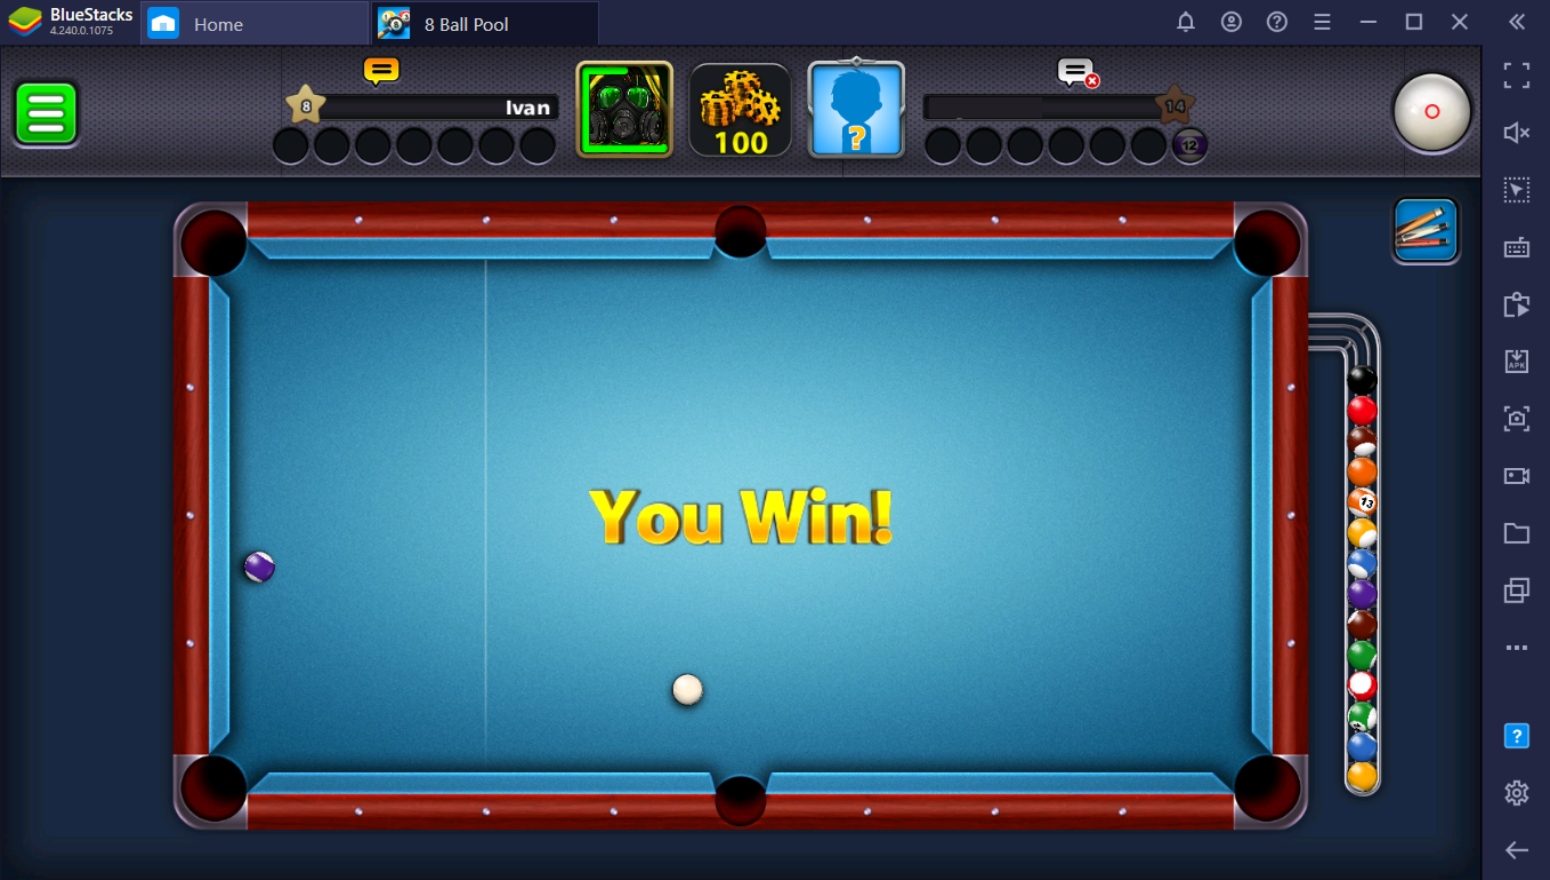 🎱 8 Ball Pool Web/PC version – Miniclip Player Experience